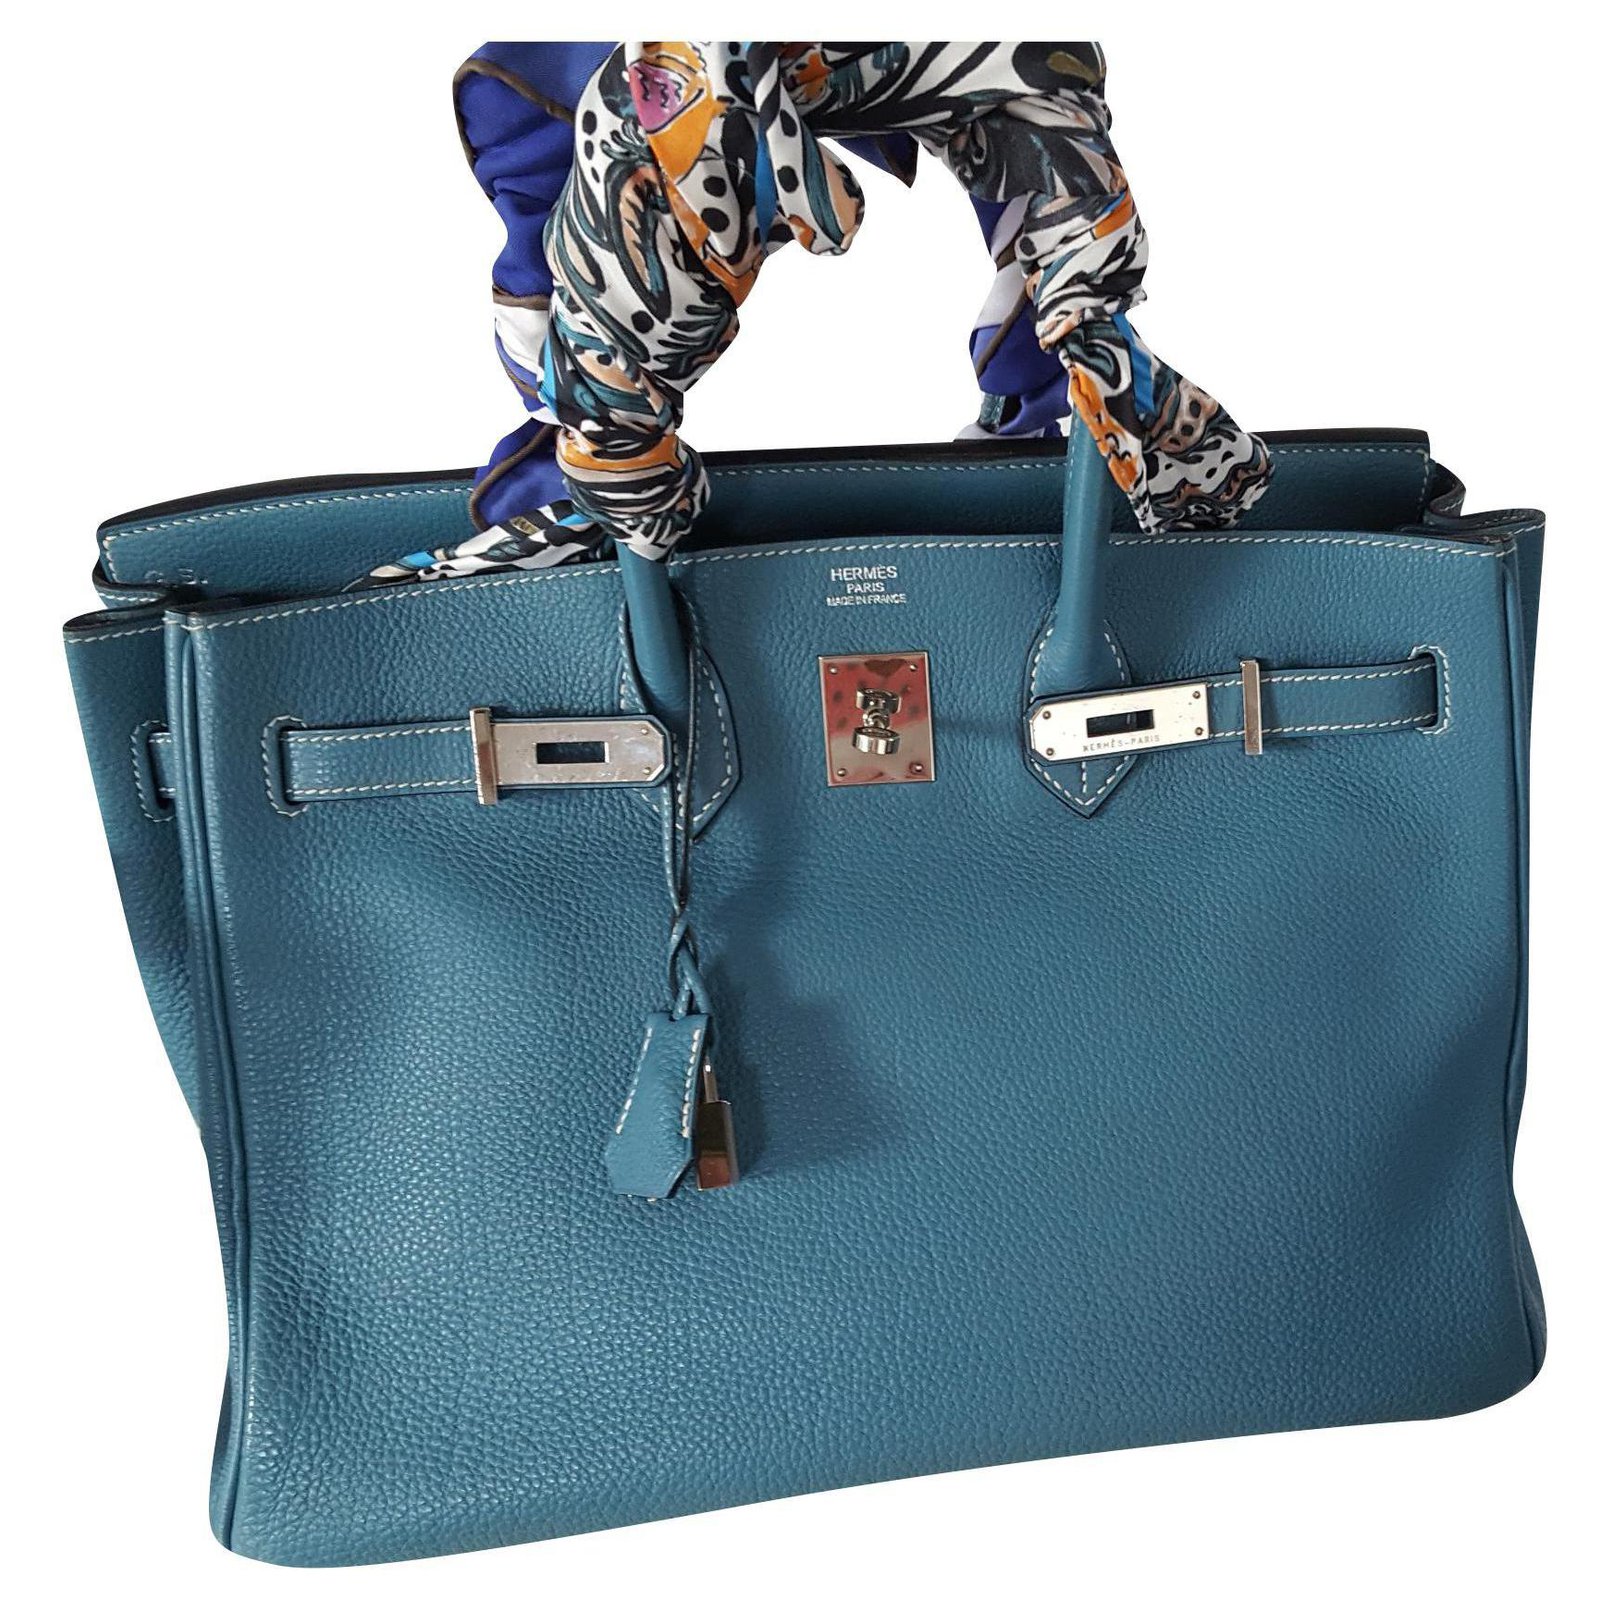 My First Hermes Birkin 35 togo leather in blue jean. A Detailed